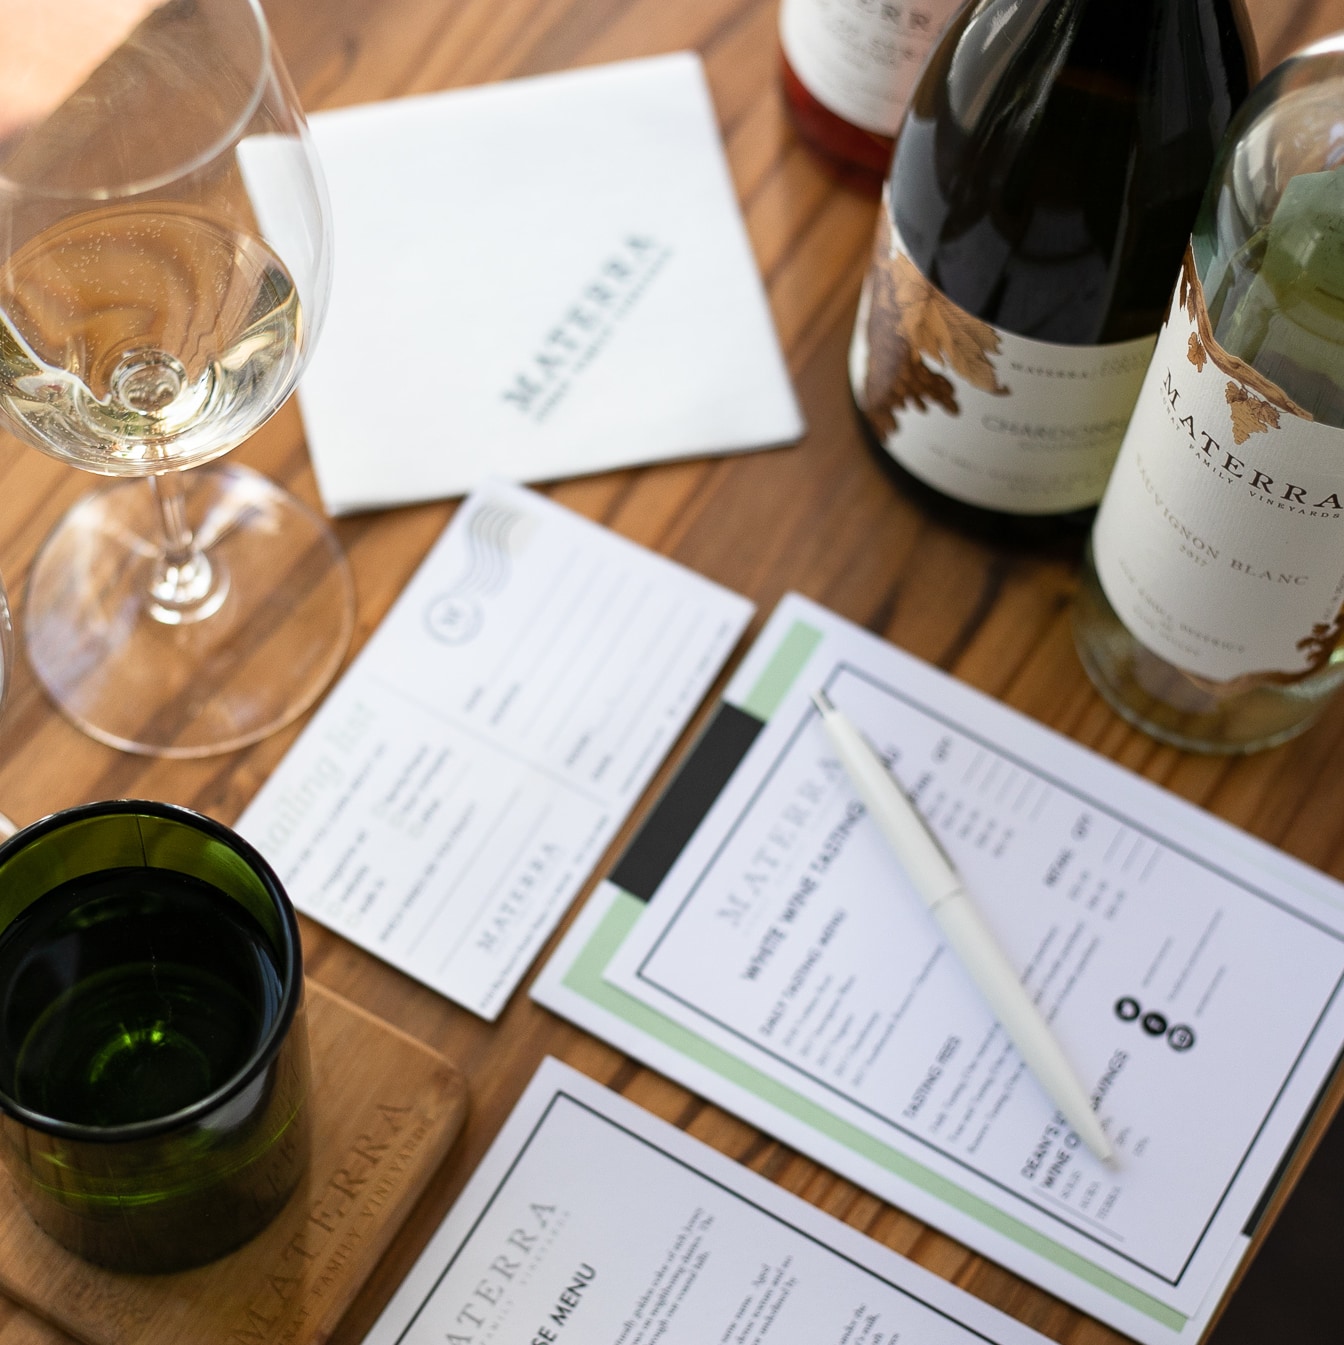 A photo of a typical wine tasting set up including glasses, bottles and order forms.